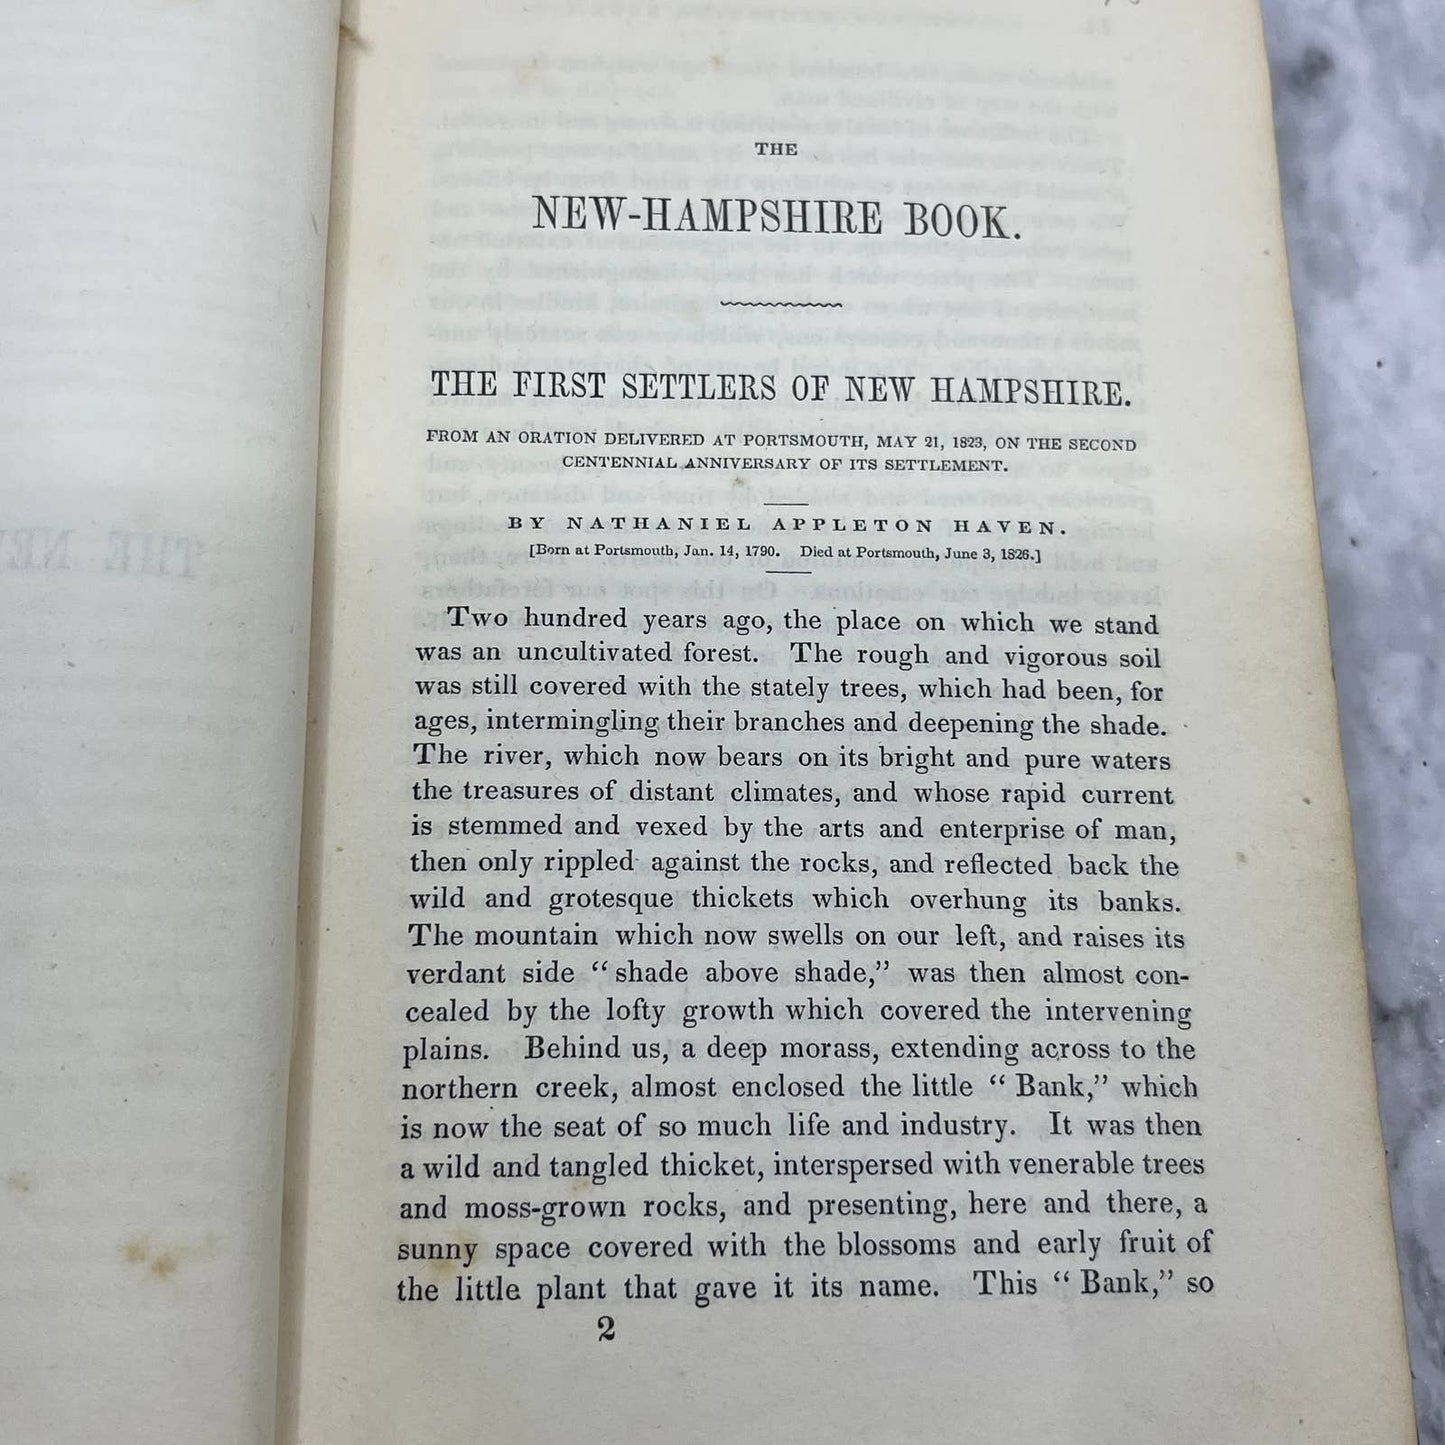 1842 1st Edition The New Hampshire Book Being Specimens of the Literature TJ6